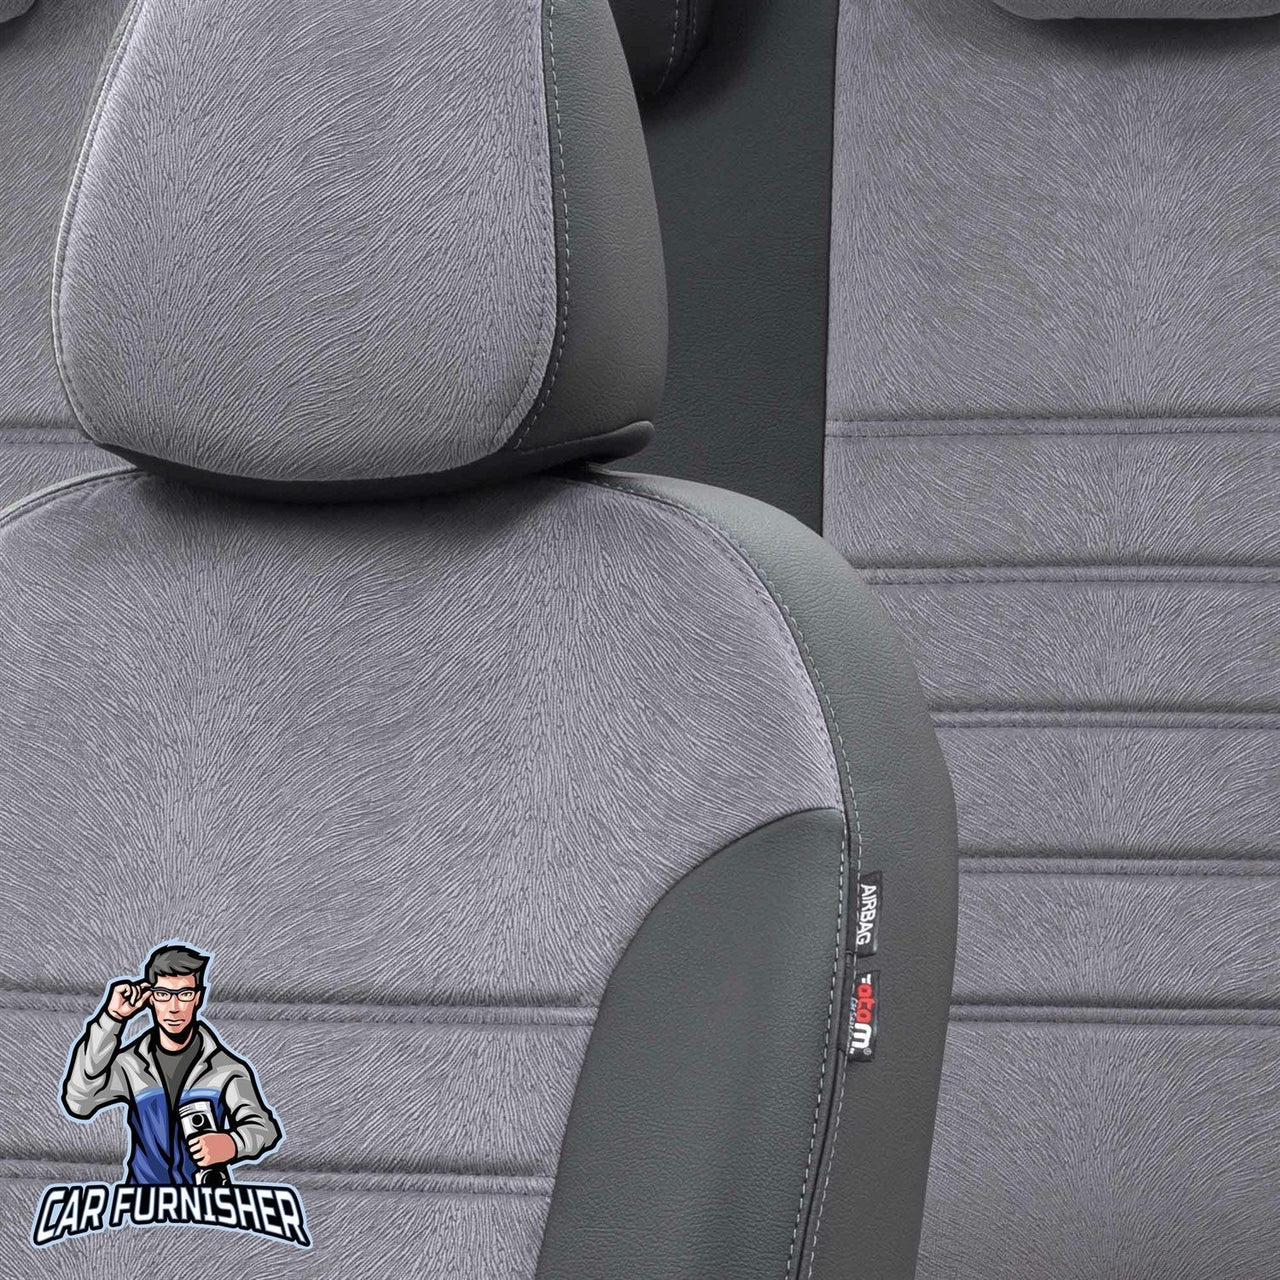 Scania R Seat Cover London Foal Feather Design Smoked Black Front Seats (2 Seats + Handrest + Headrests) Leather & Foal Feather